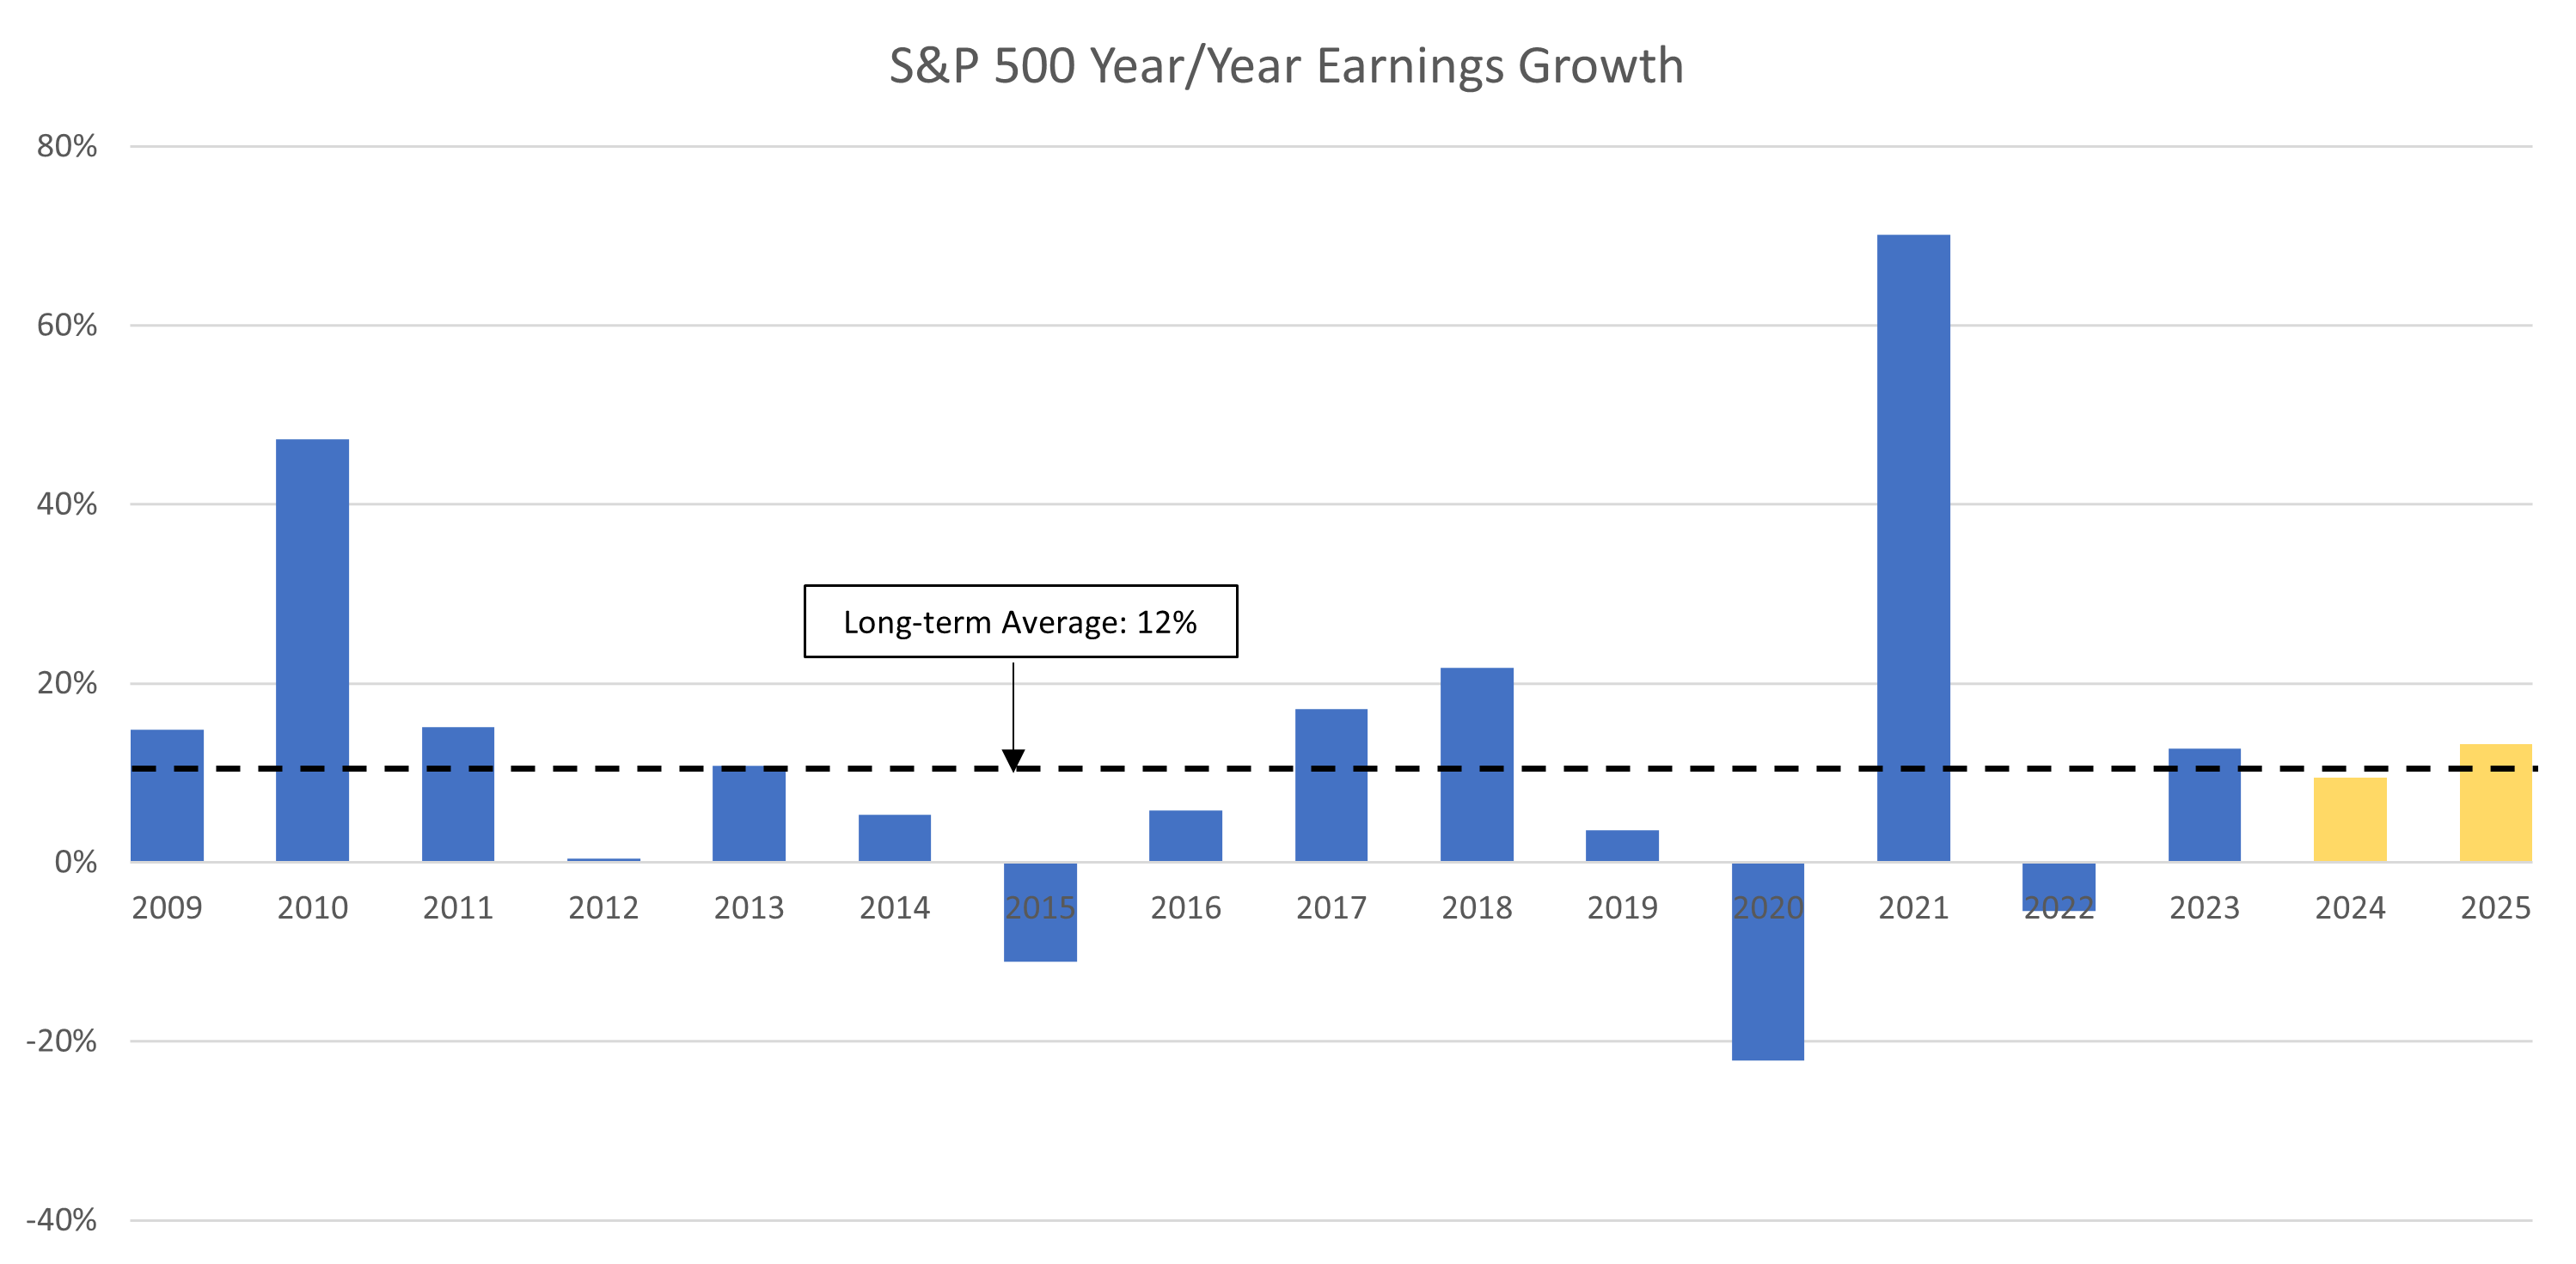 S&P 500 Year/Year Earnings Growth